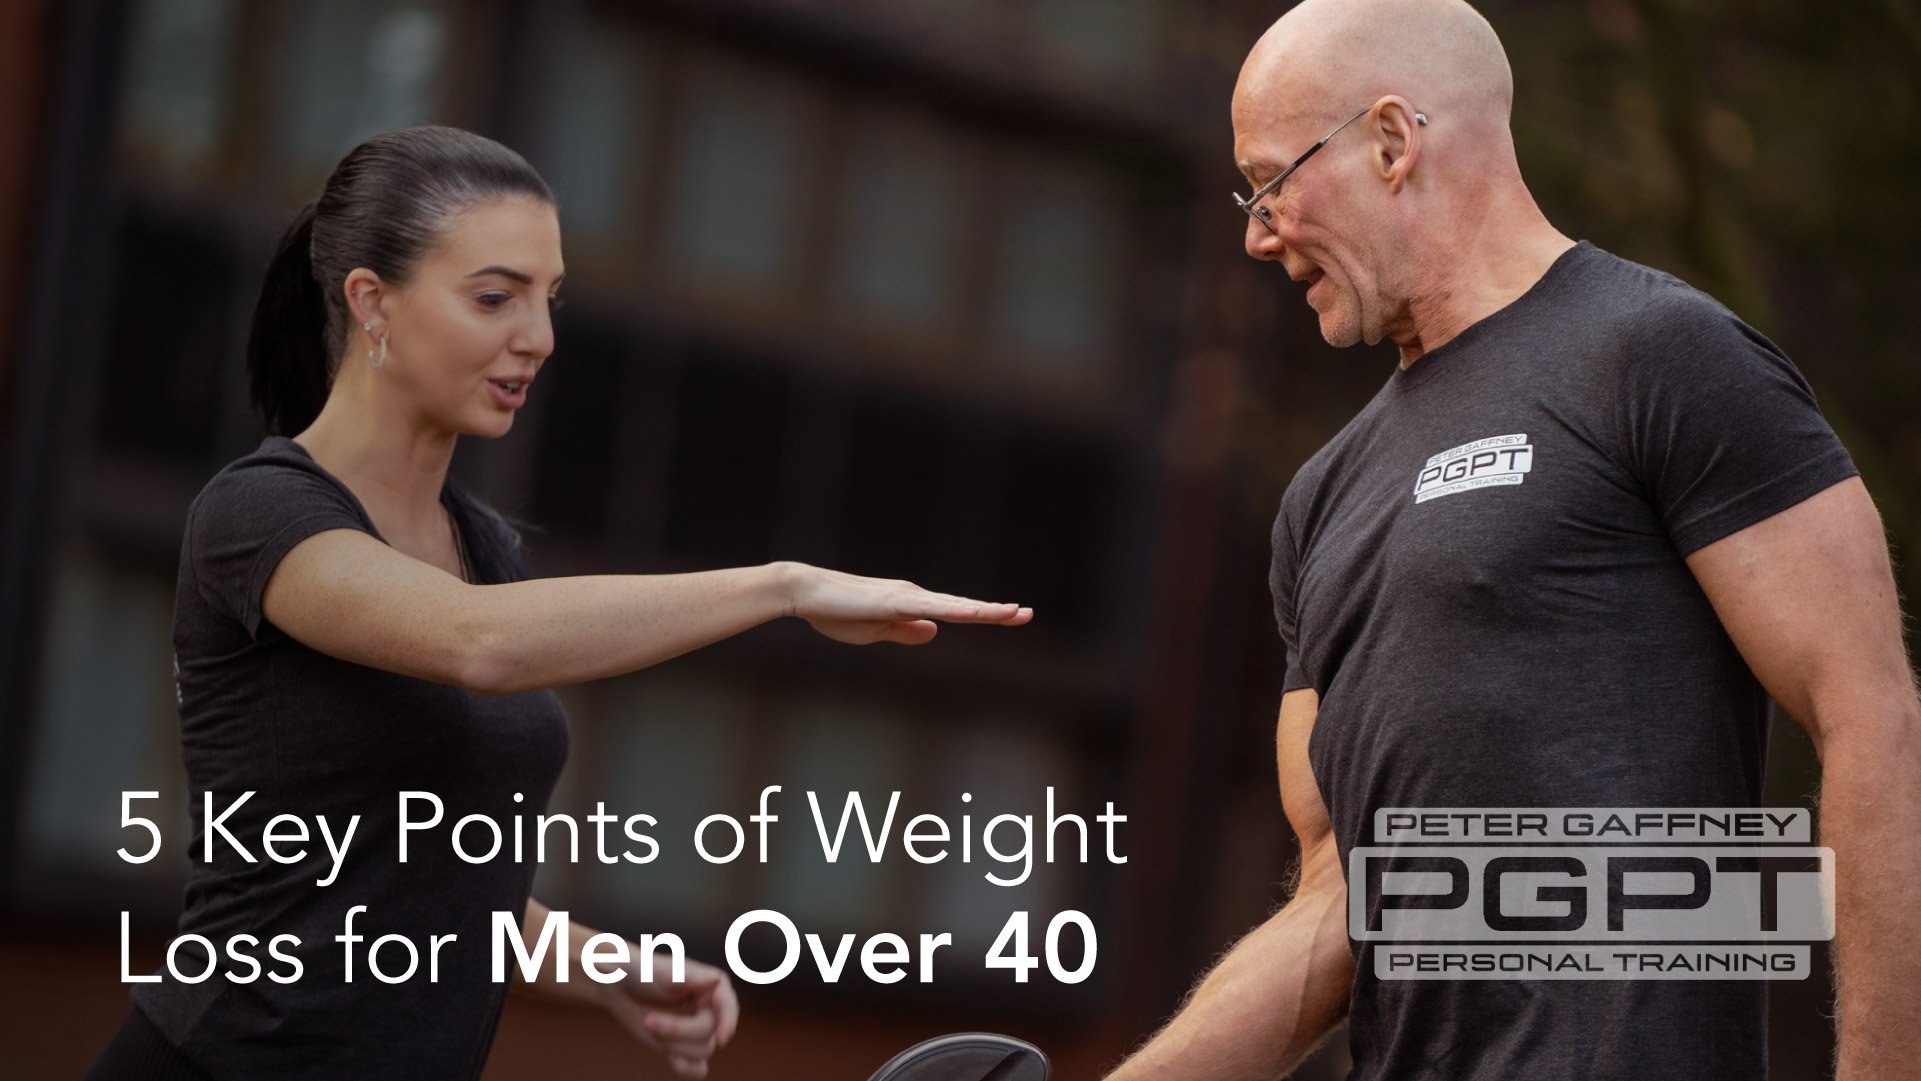 5 Key Points of Weight Loss for Men Over 40